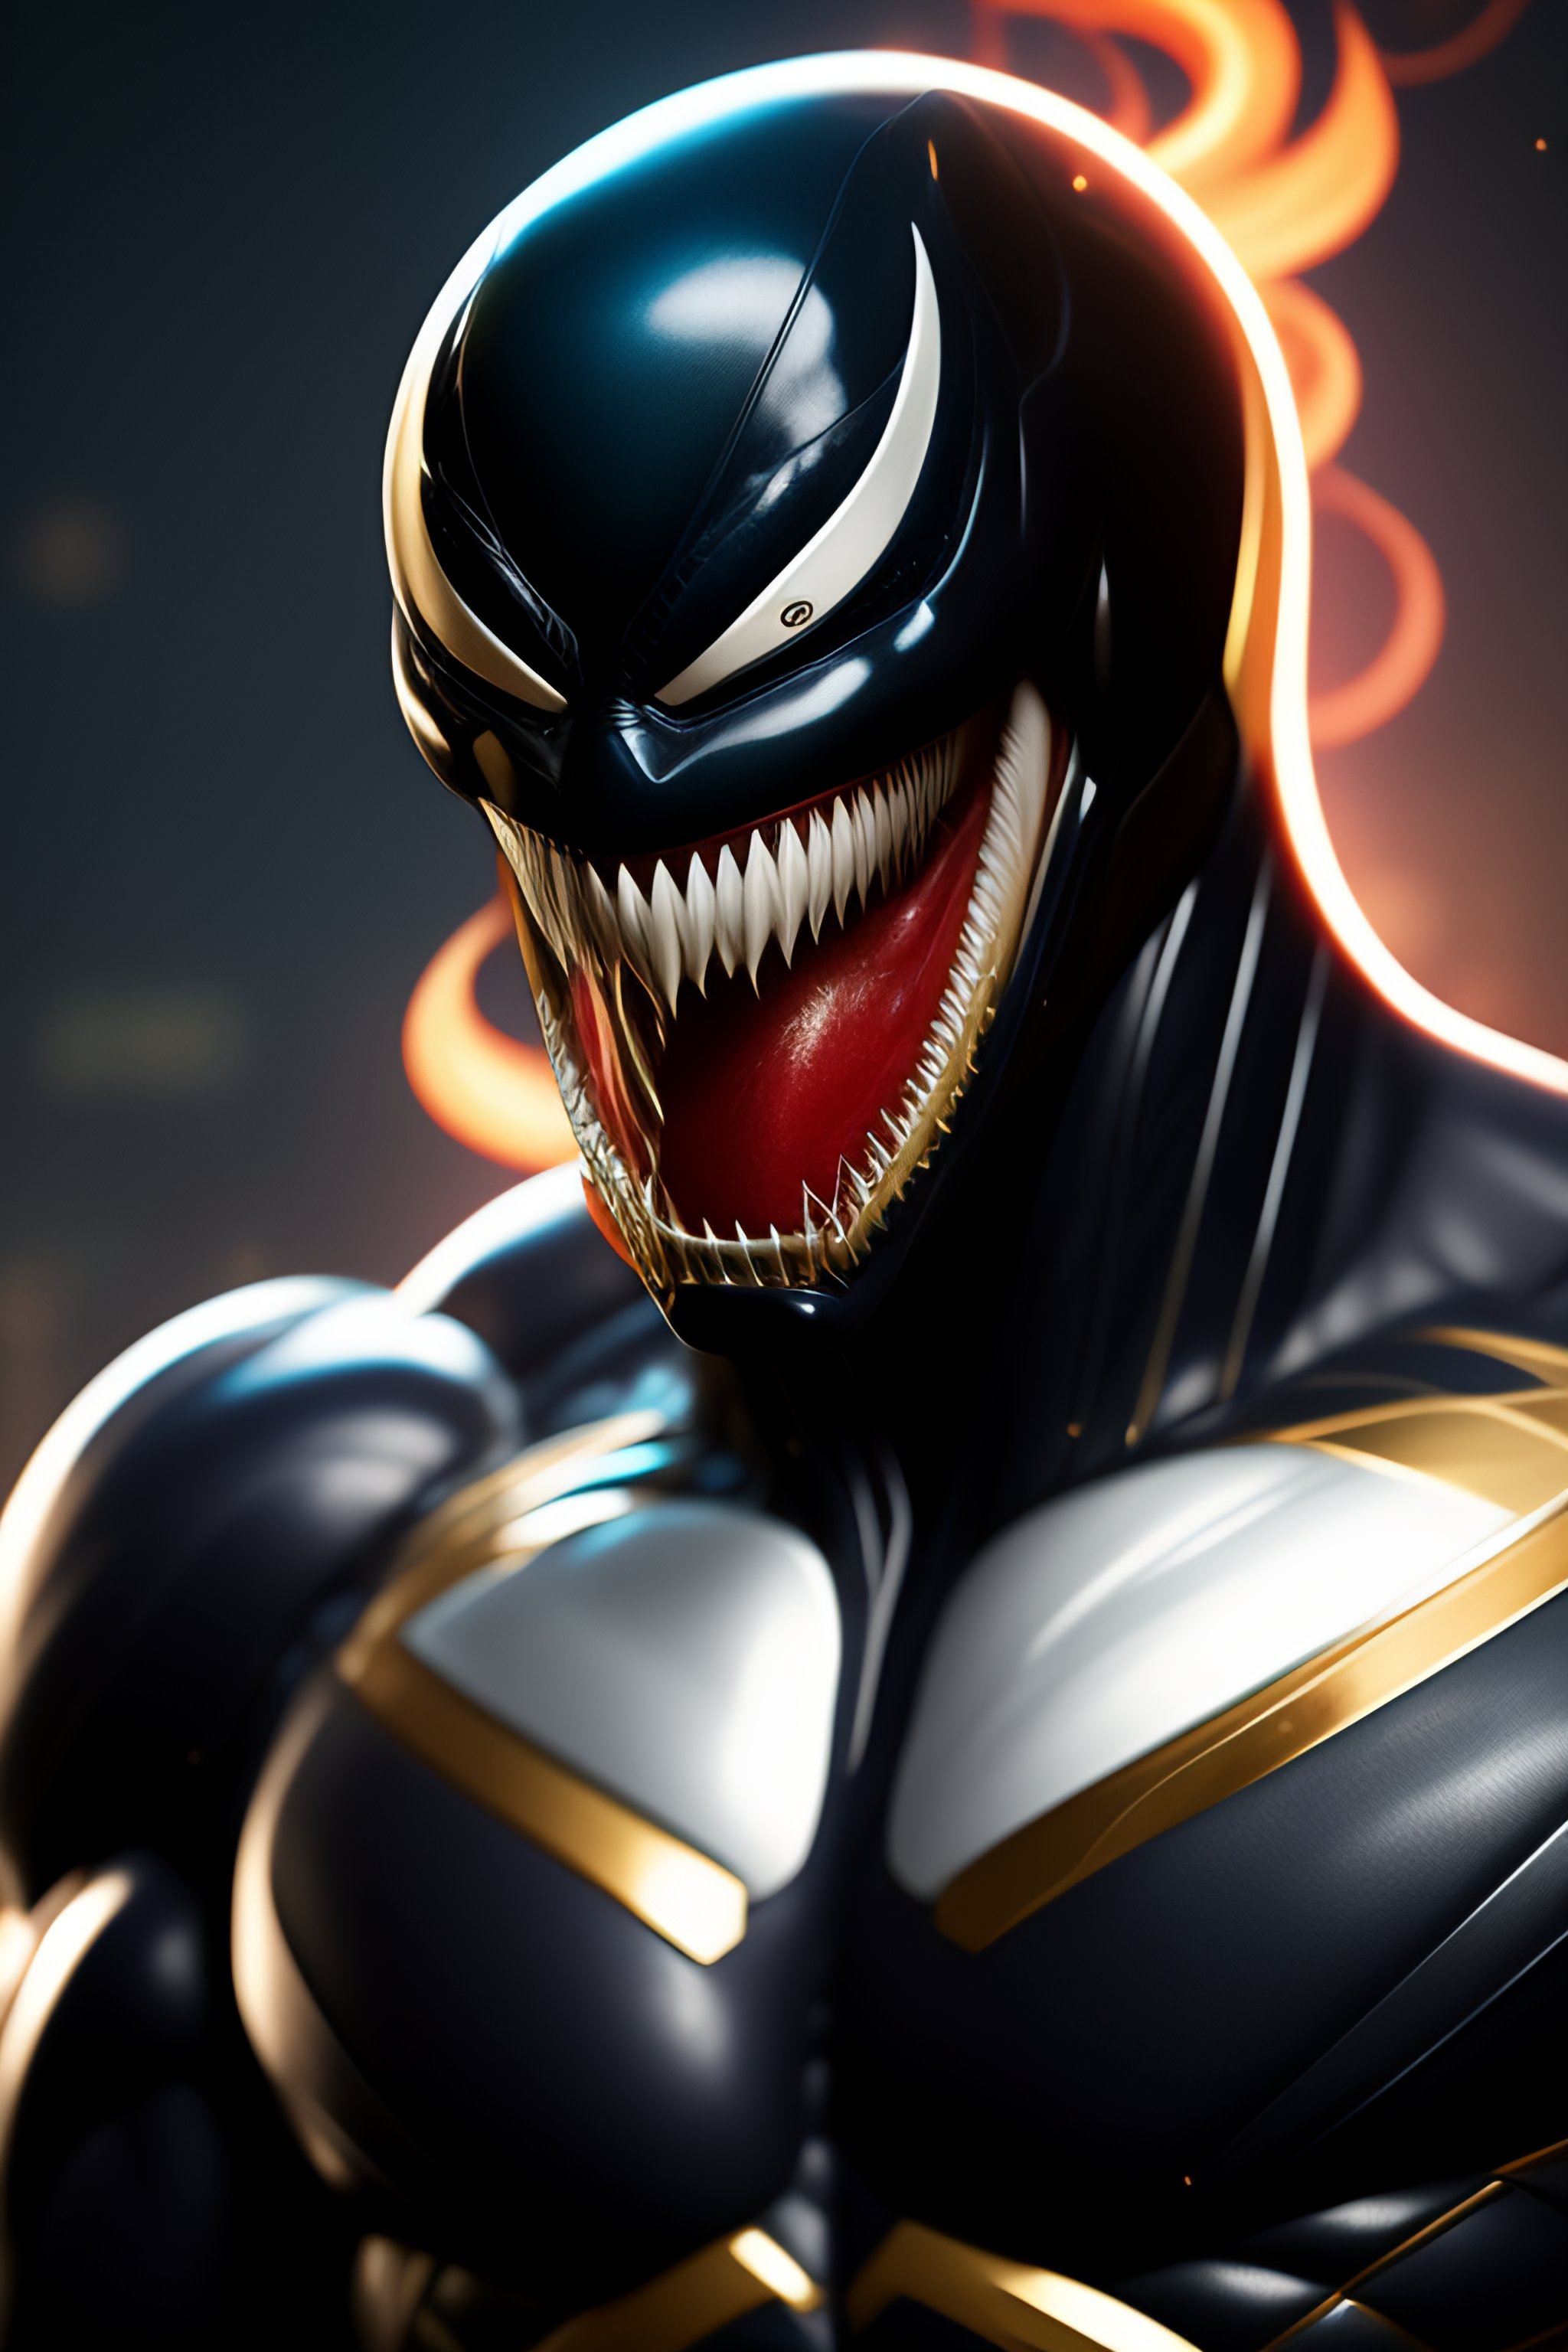 Lexica - Full body portrait of Venom symbiote appears as a black and red  suit that seems to pulsate and flow around Deadpool's body. It enhances his